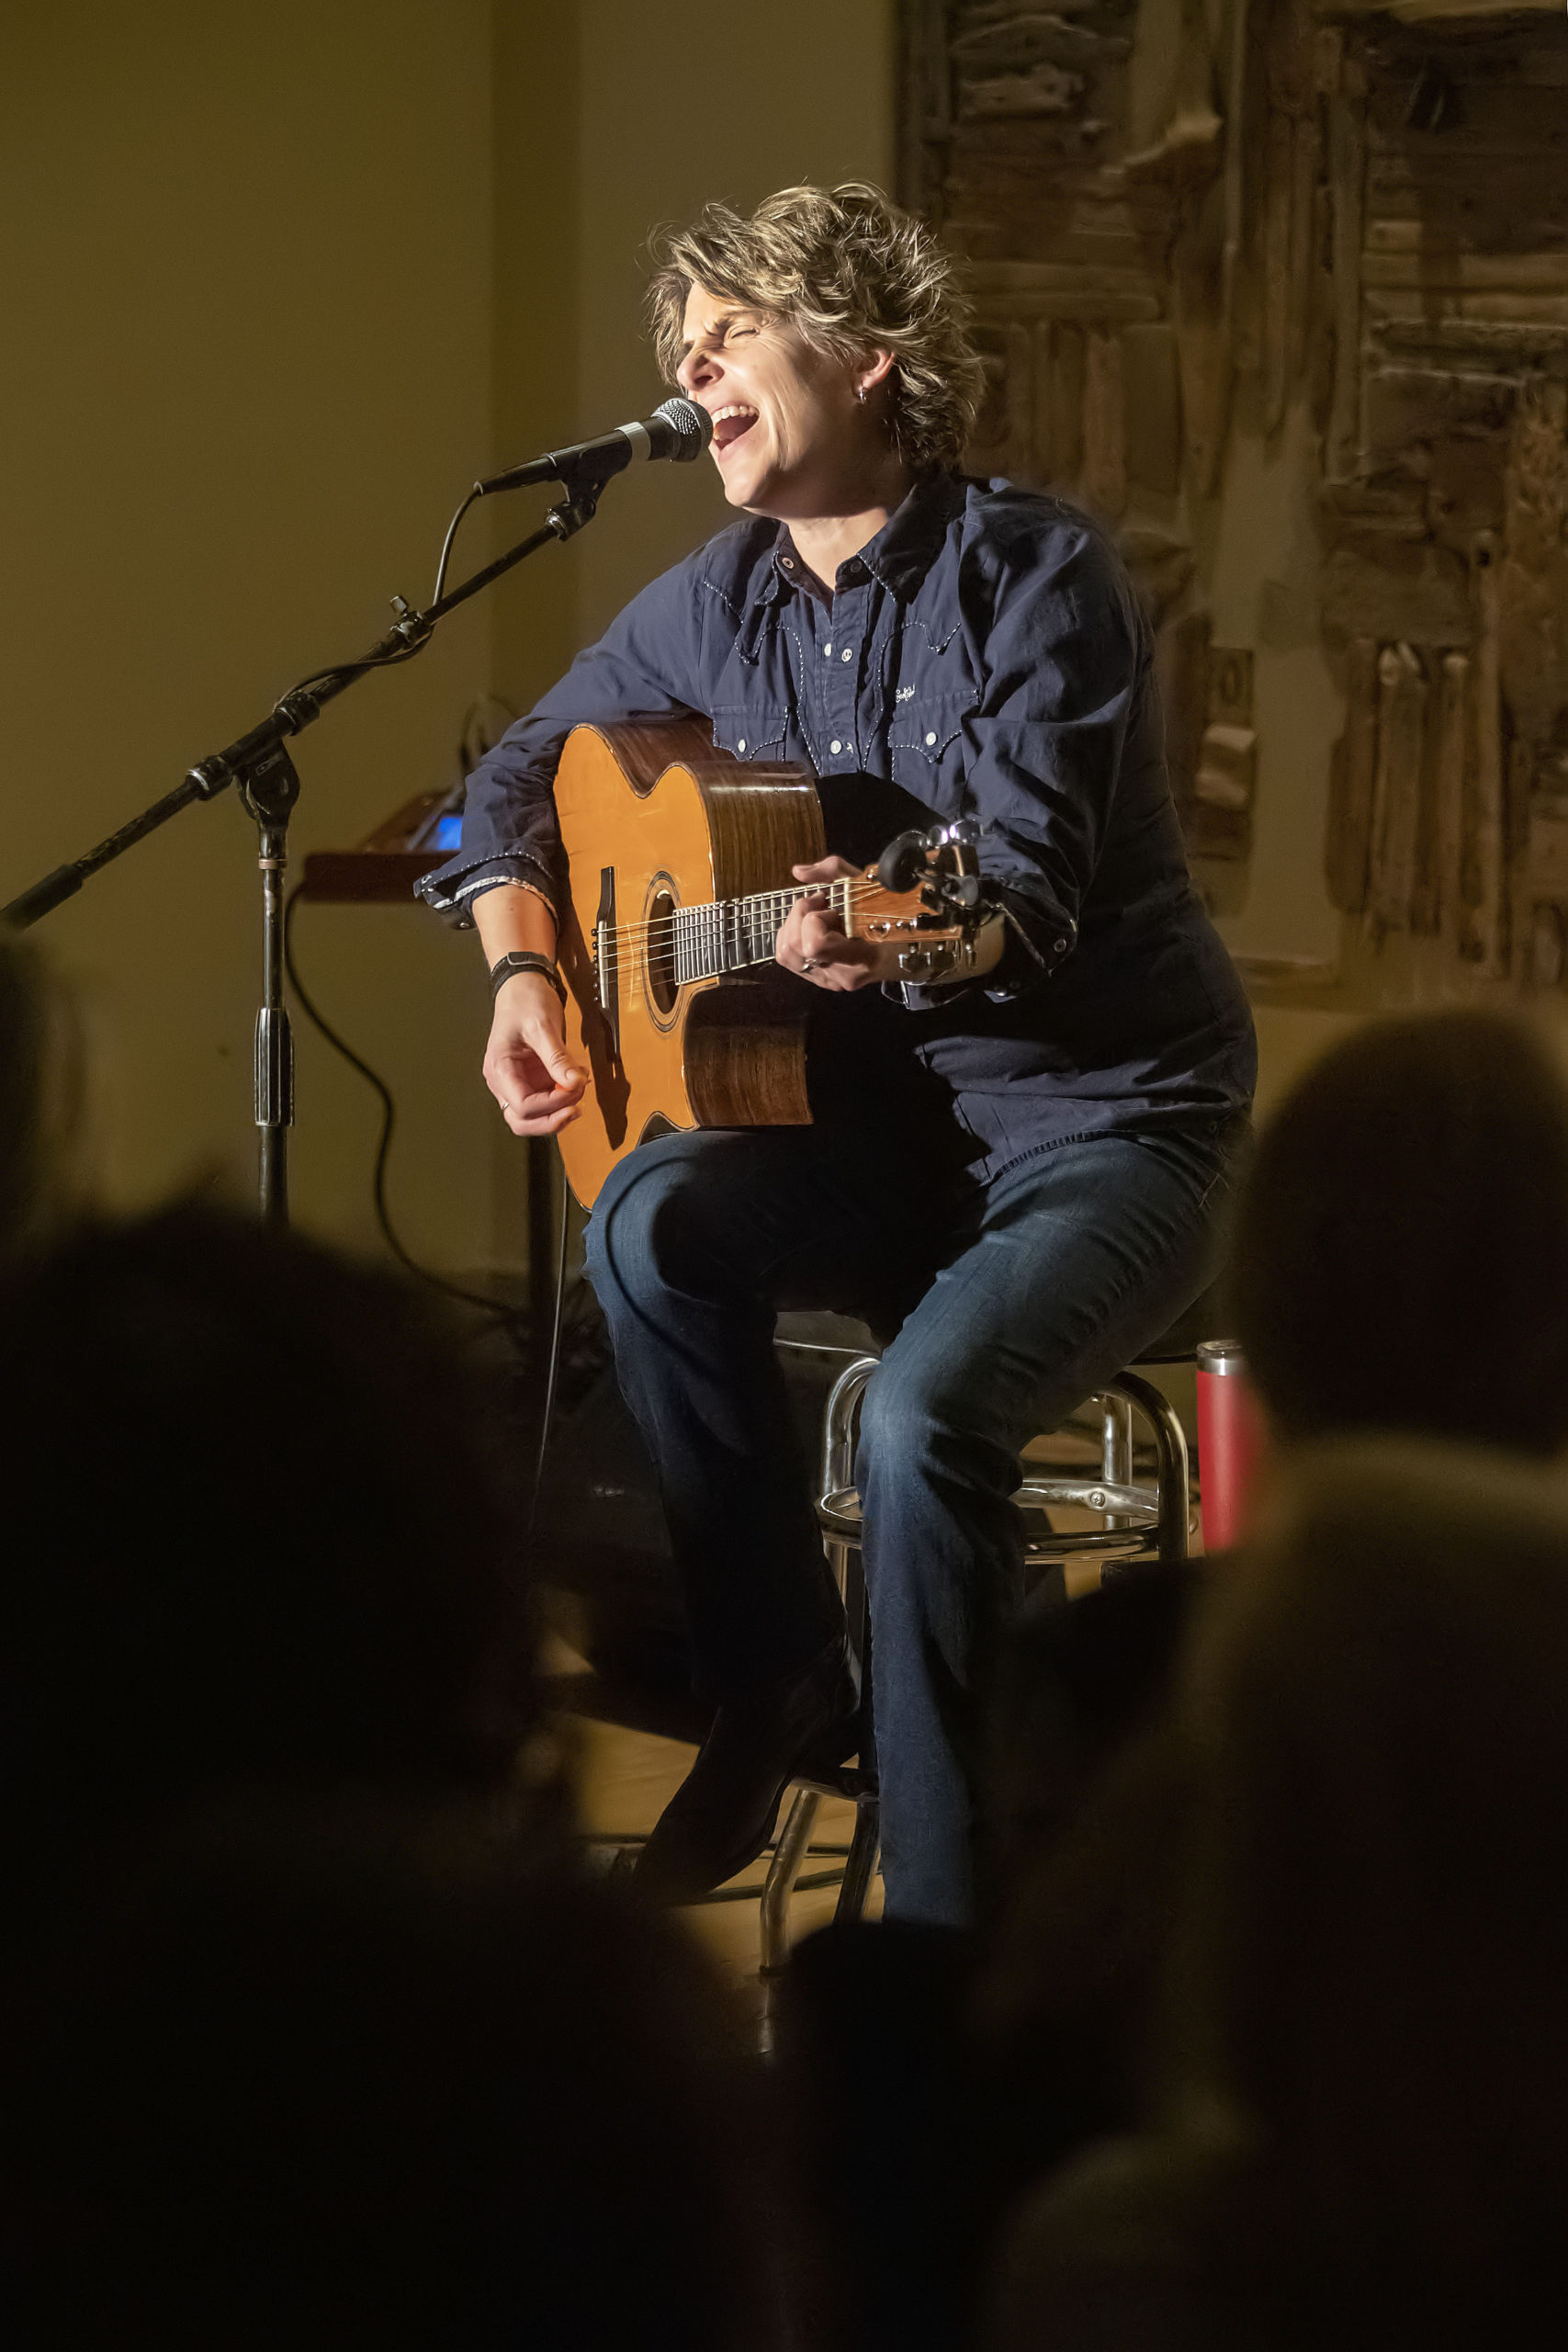 Inda Eaton performing during Songwriters Share at the Unitarian Universalist Meeting House in Bridgehampton in February, 2019.